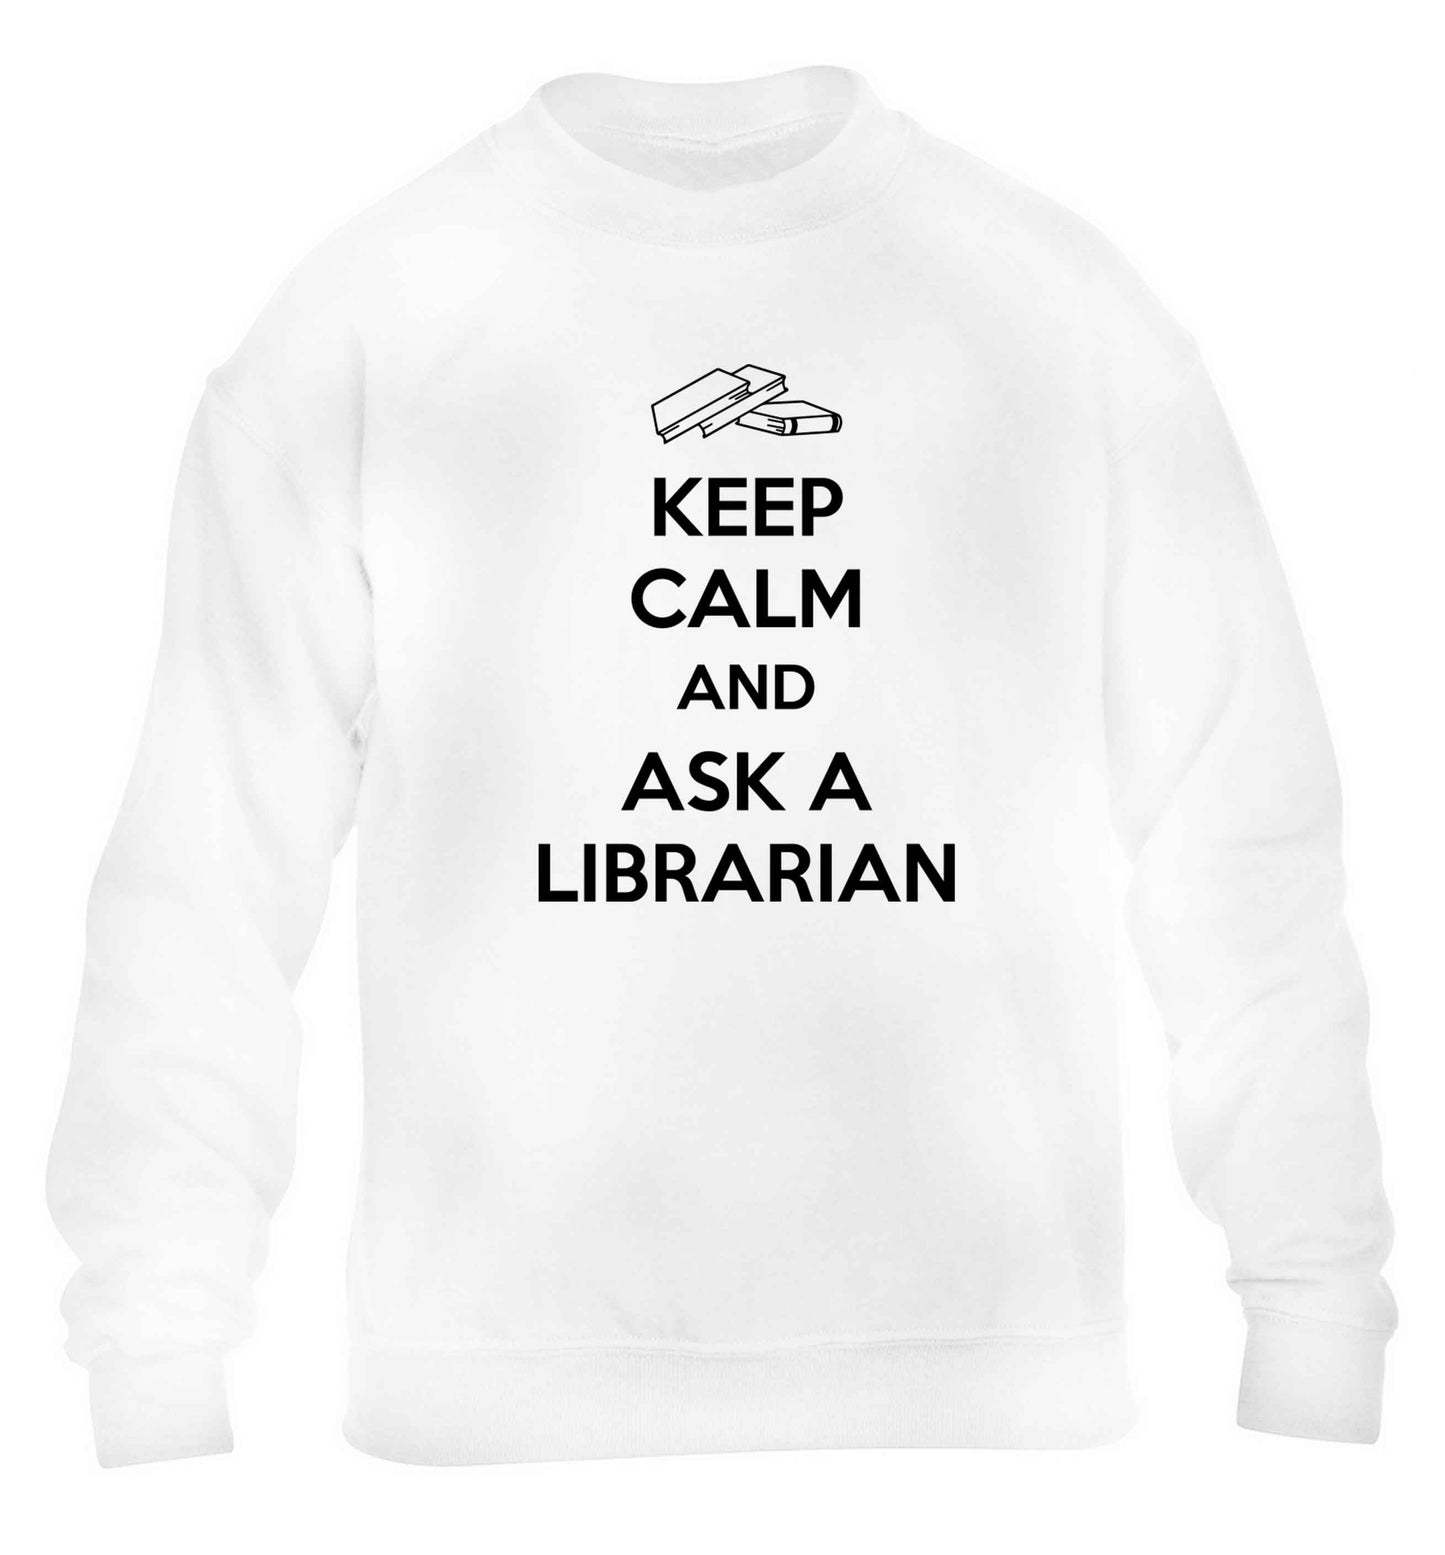 Keep calm and ask a librarian children's white sweater 12-13 Years